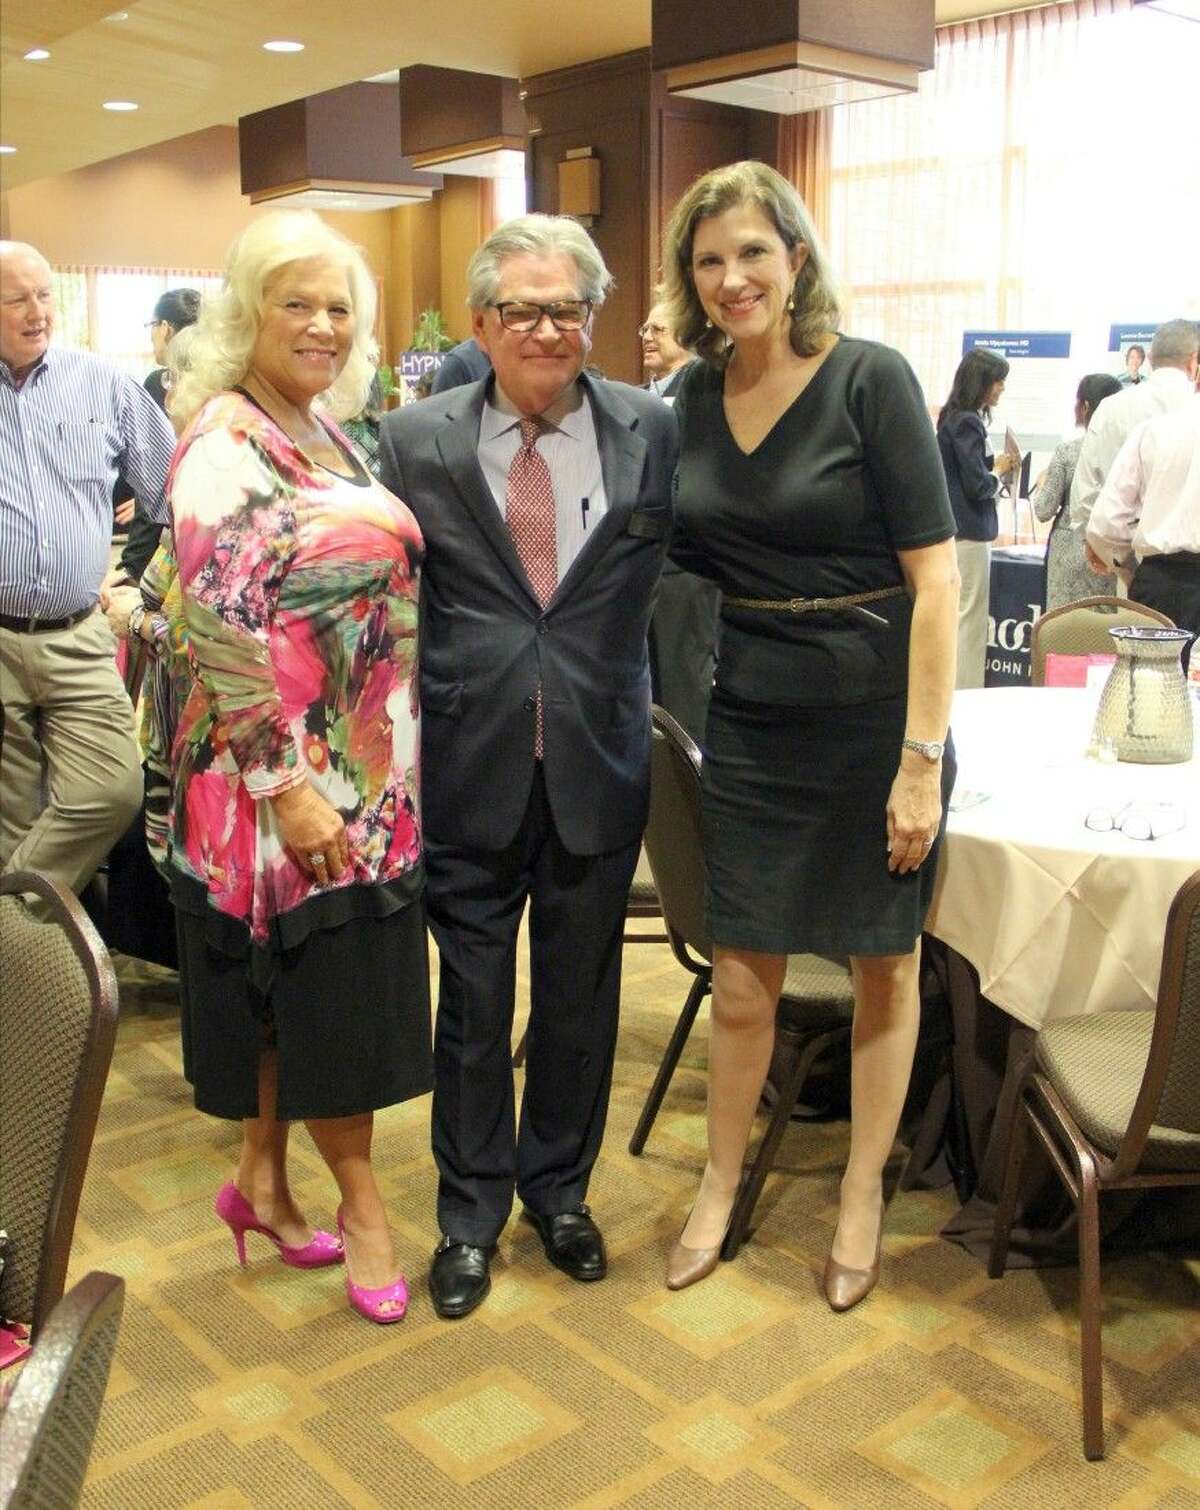 Fay Picard of Rep. Greg Bonnen's office (left), Buzz Crainer of The Journal (center) and Rebecca Lilley of Hermann Memorial Southeast Hospital (right).